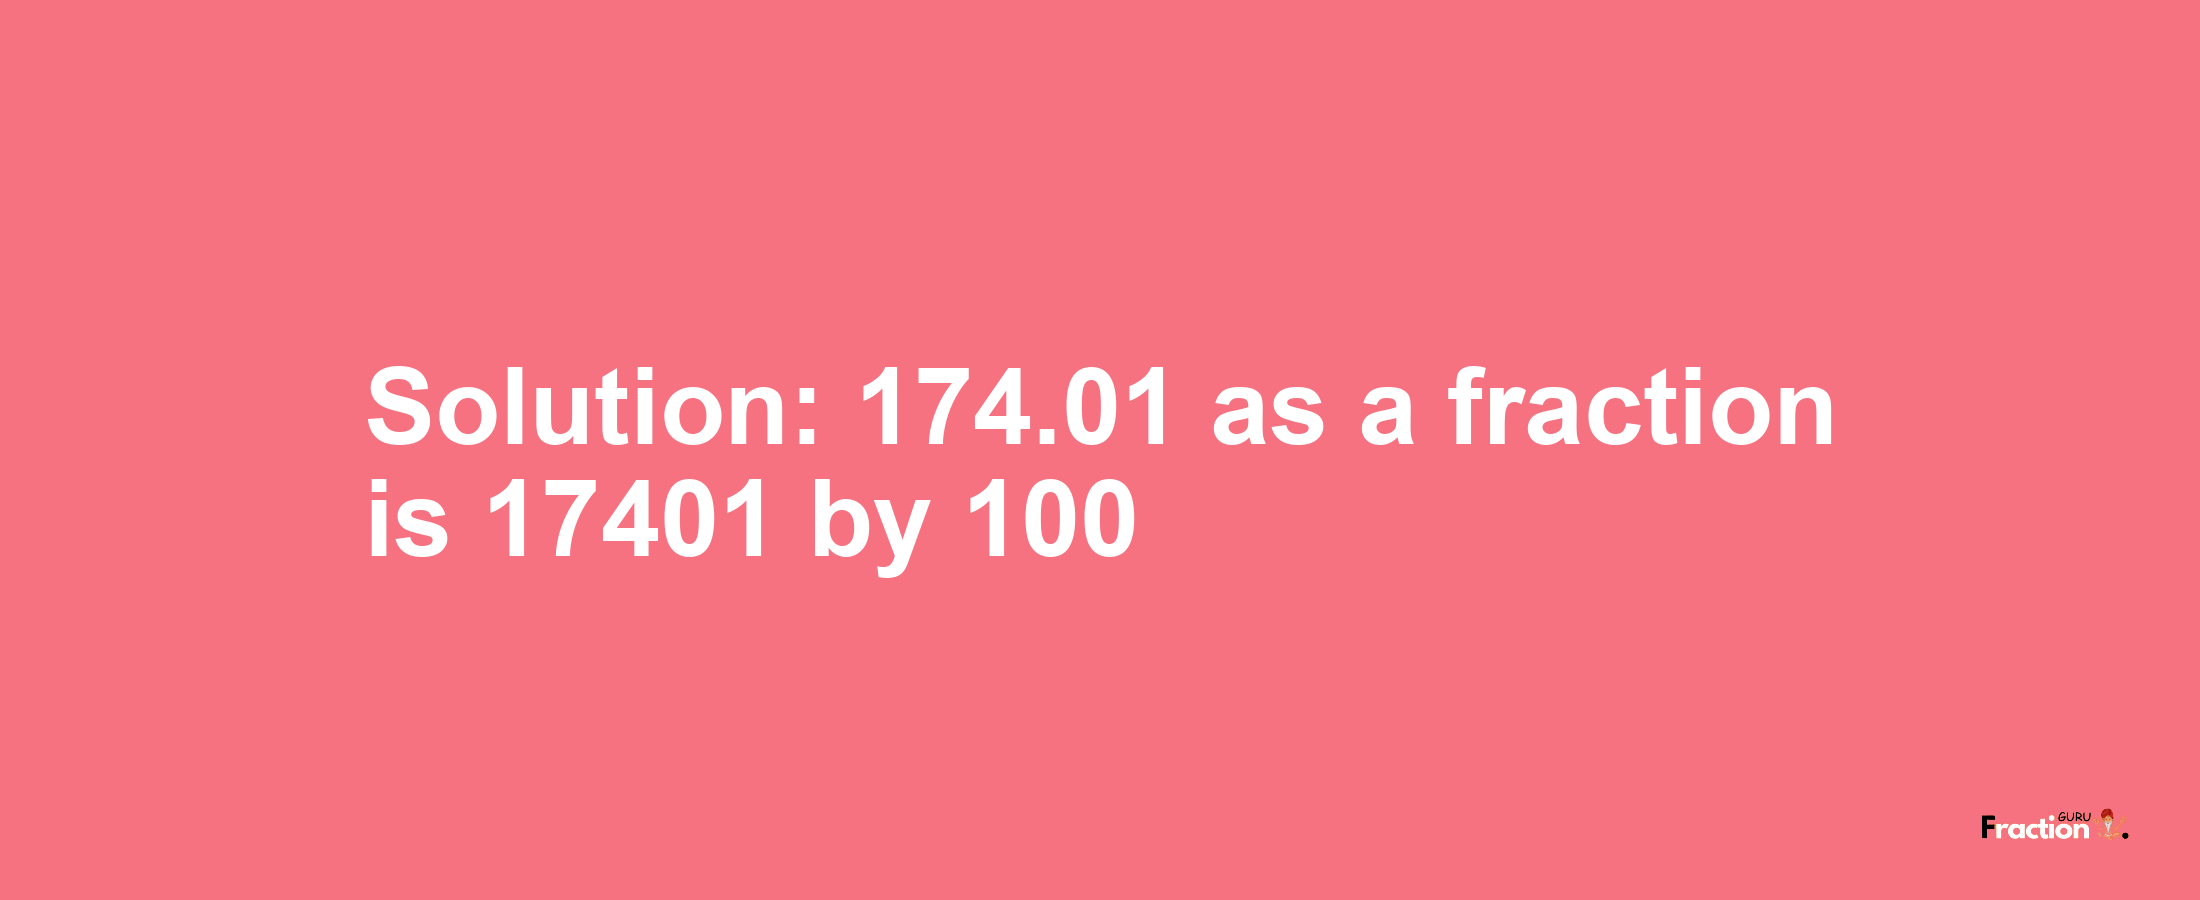 Solution:174.01 as a fraction is 17401/100